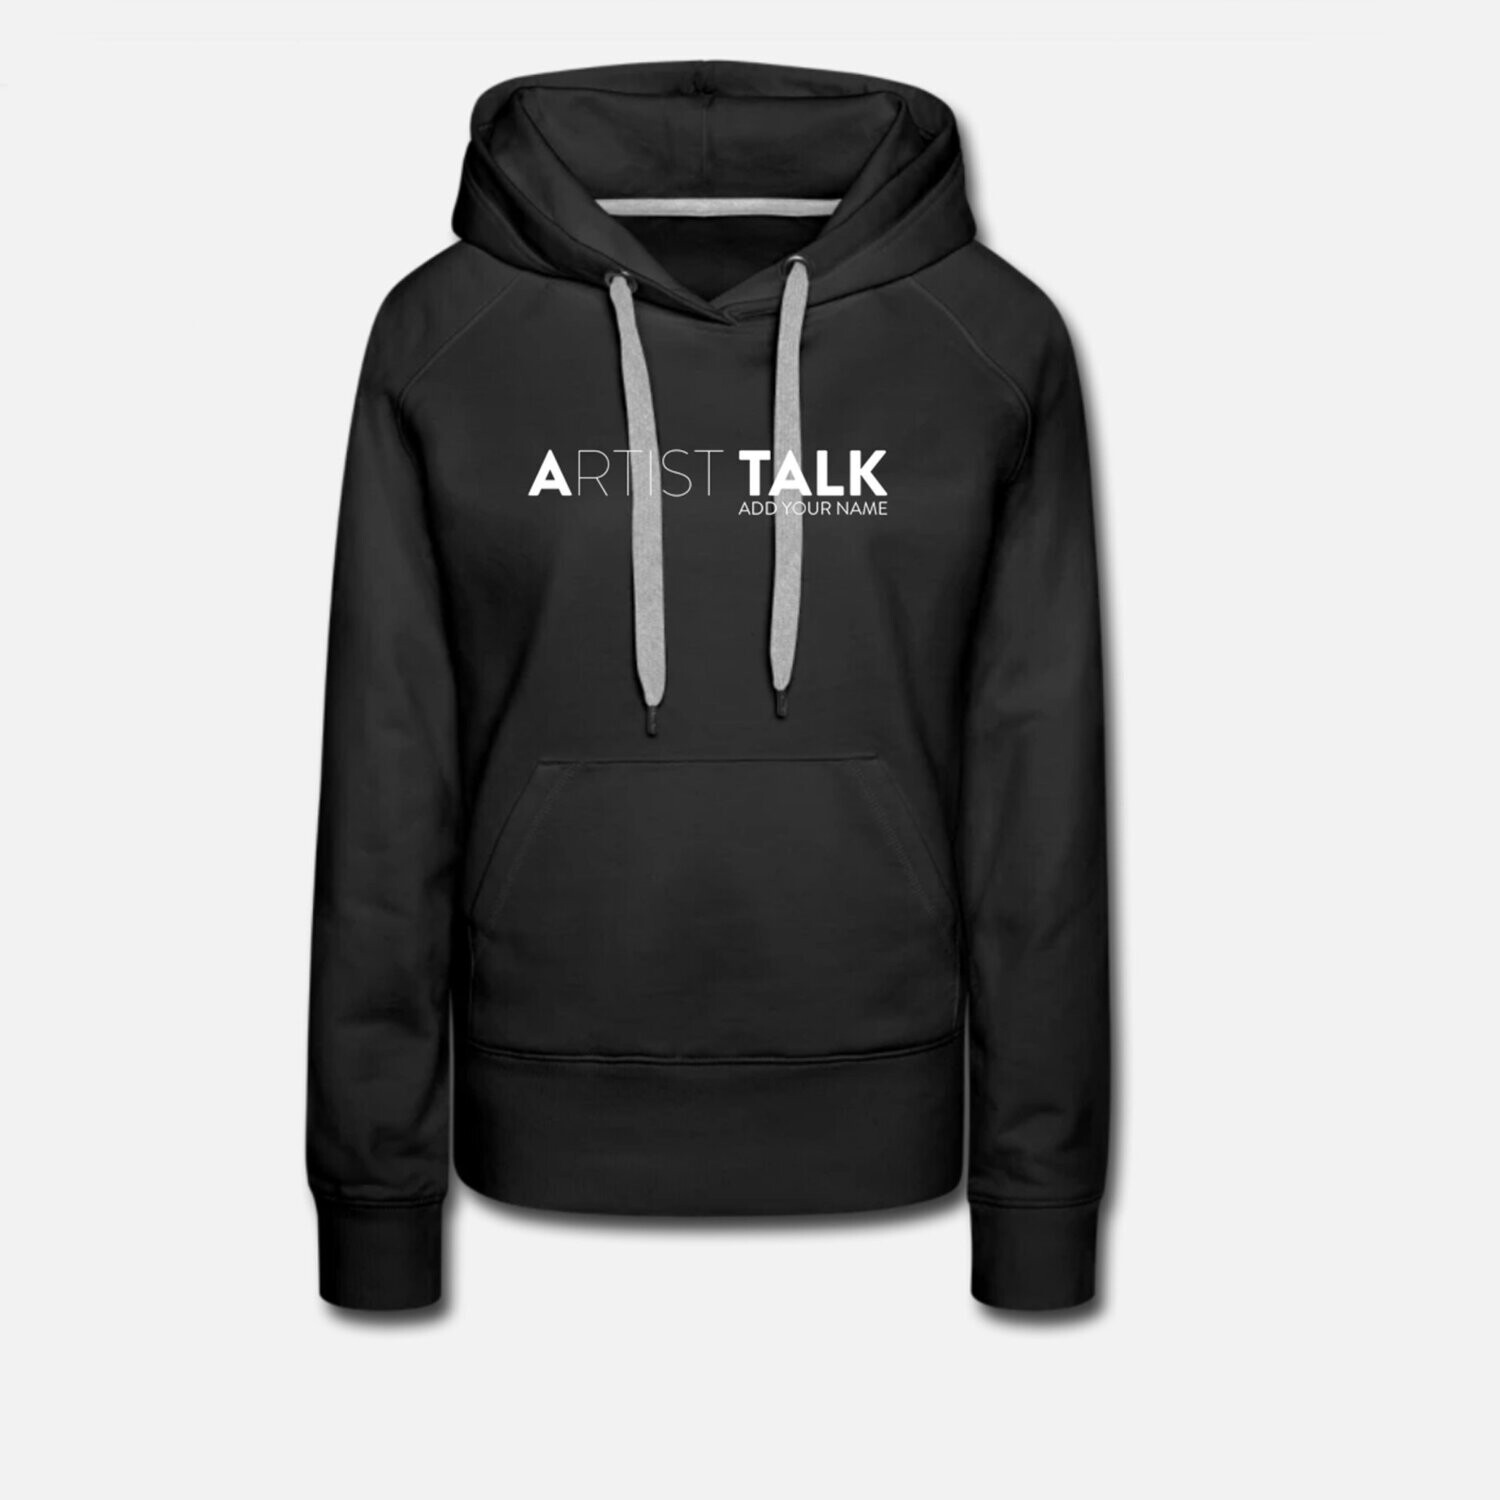 Women's Hoodie - Artist Talk customize add your name